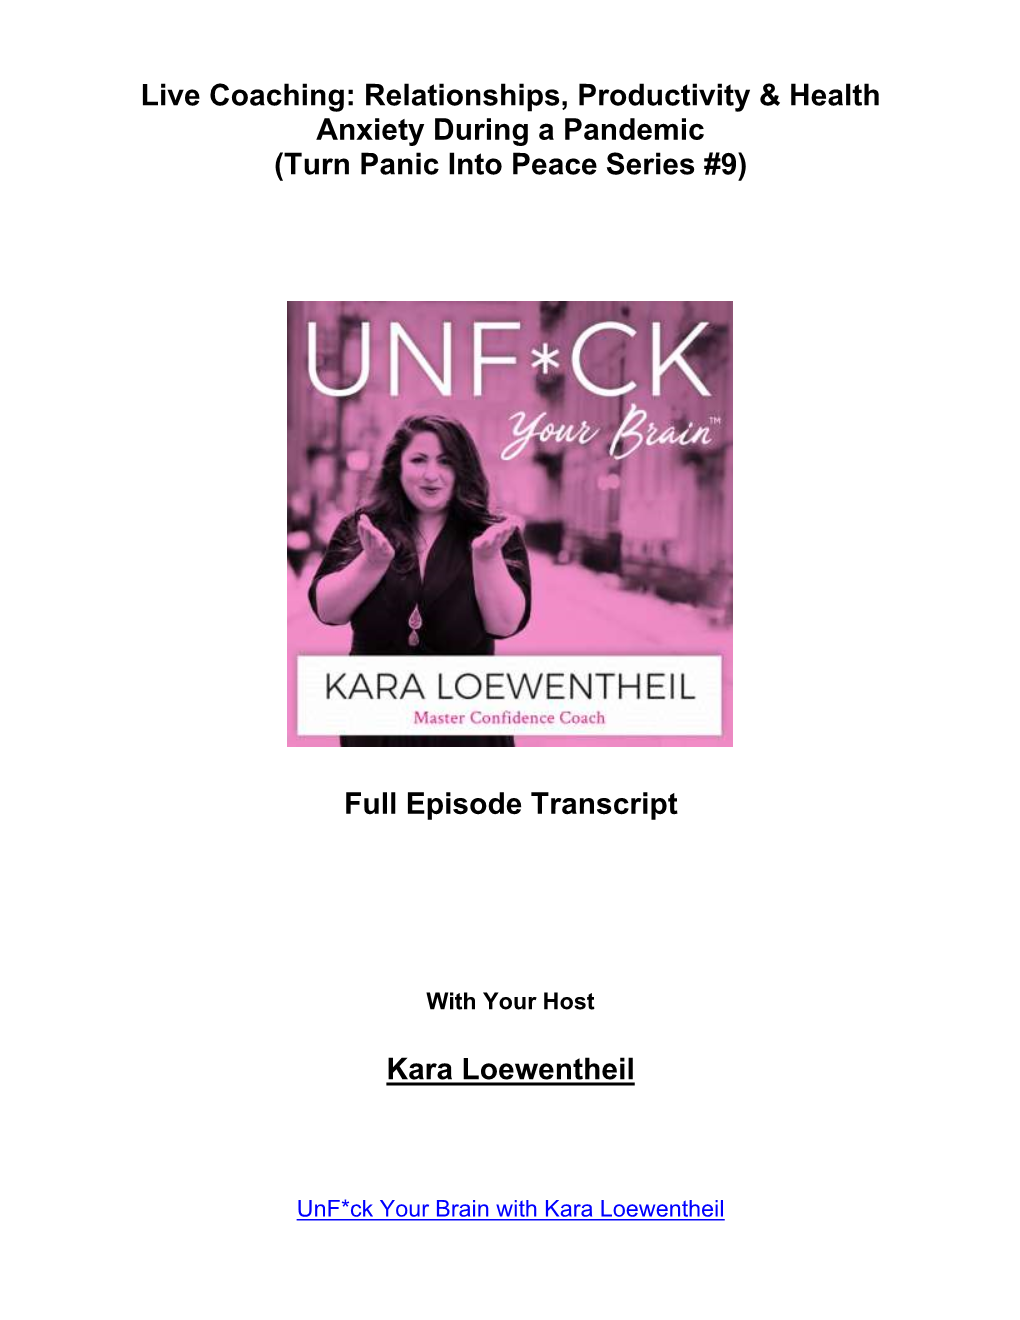 Live Coaching: Relationships, Productivity & Health Anxiety During a Pandemic (Turn Panic Into Peace Series #9)